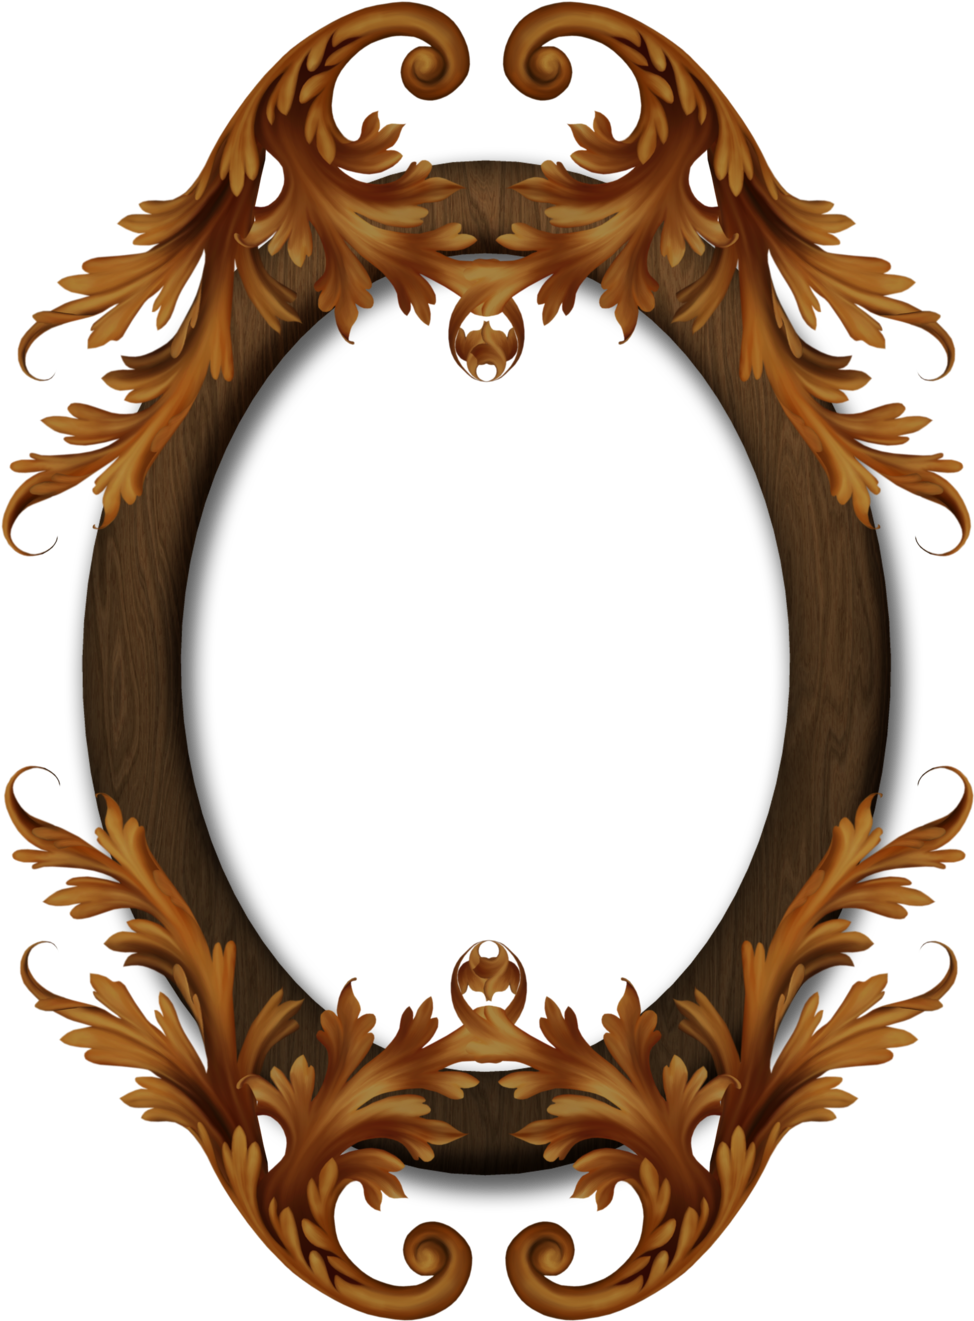 Autumn Frame By Collect And Creat - Picture Frame (1024x1529)